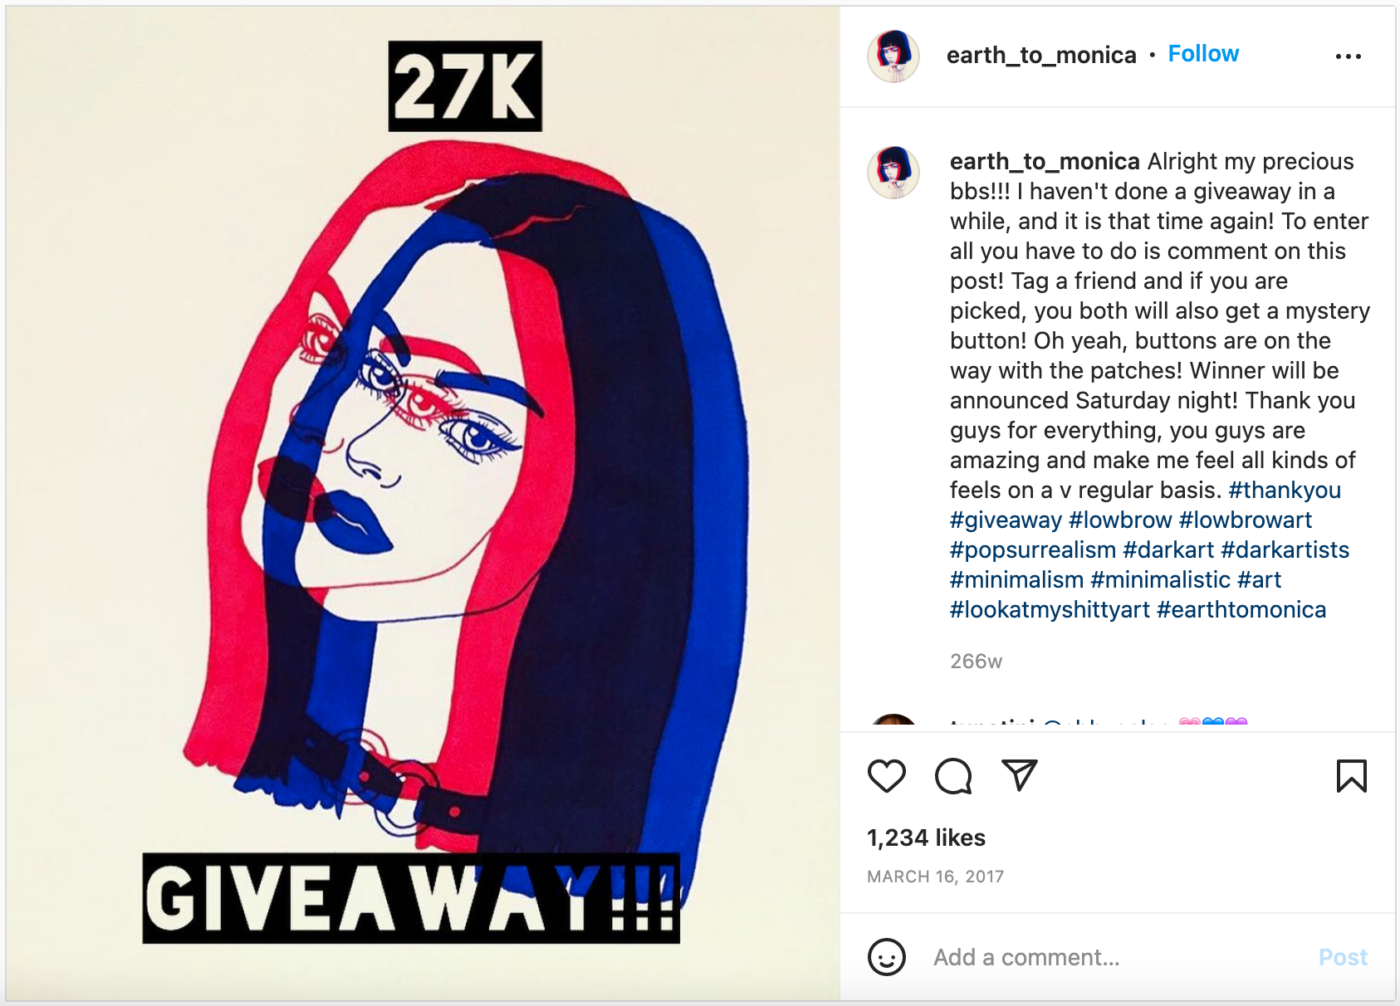 Earth to Monica’s giveaway post when she hit 27,000 Instagram followers